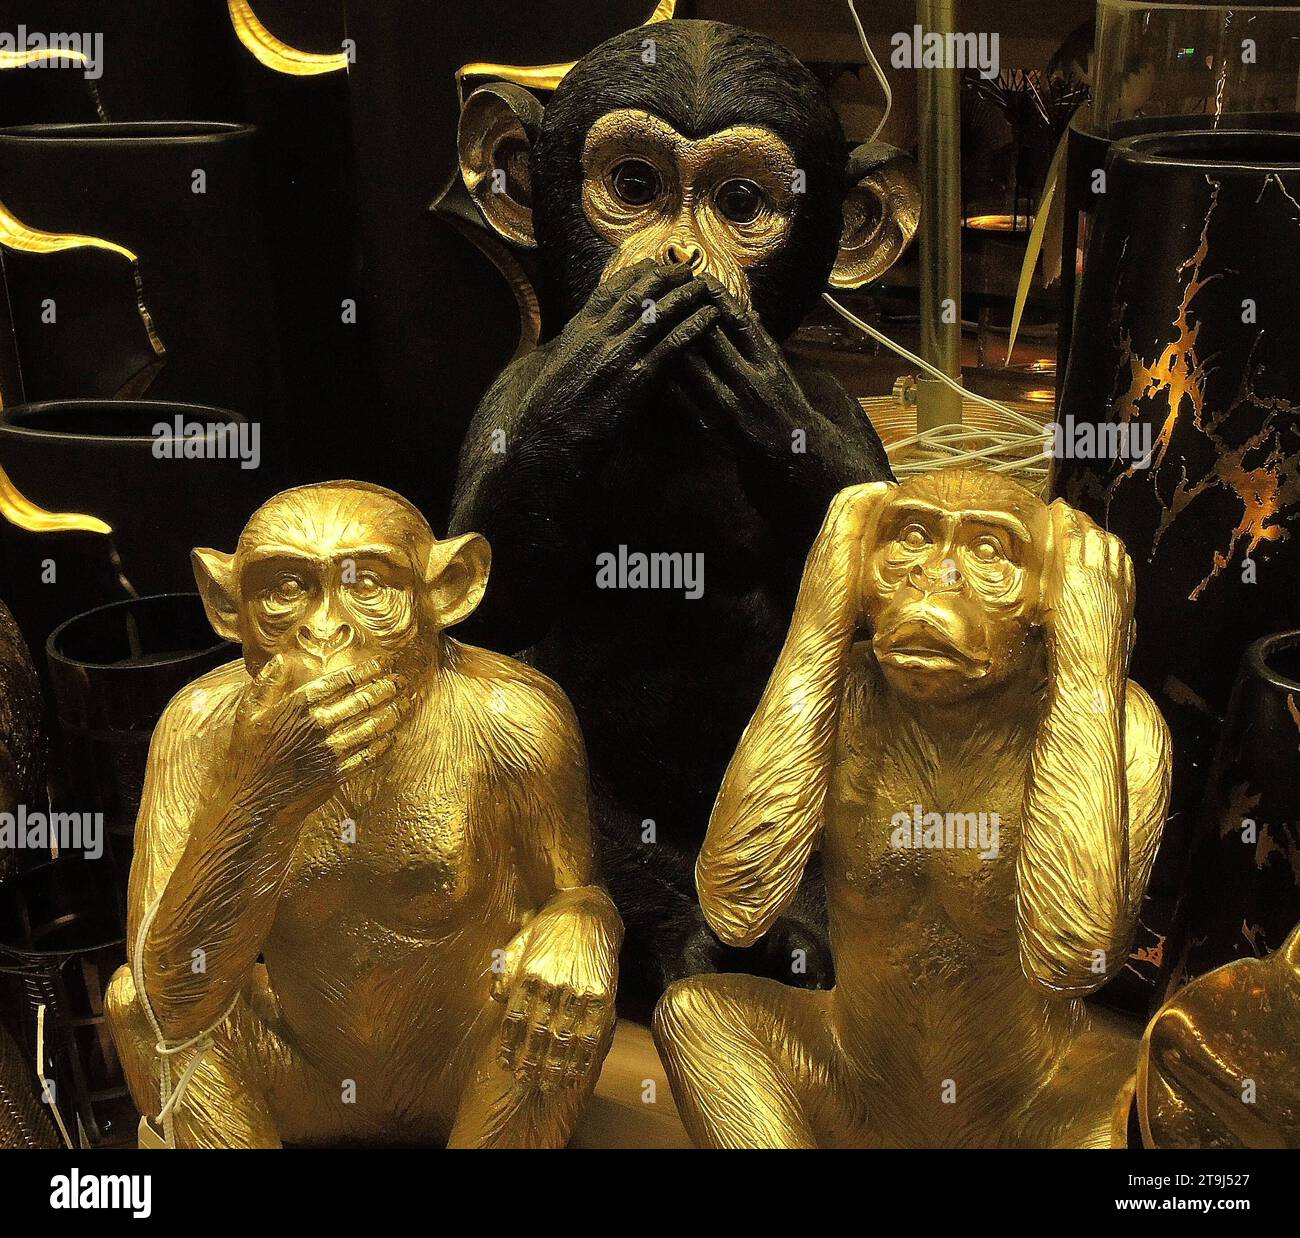 stock Hear Alamy images hi-res - nothing photography and